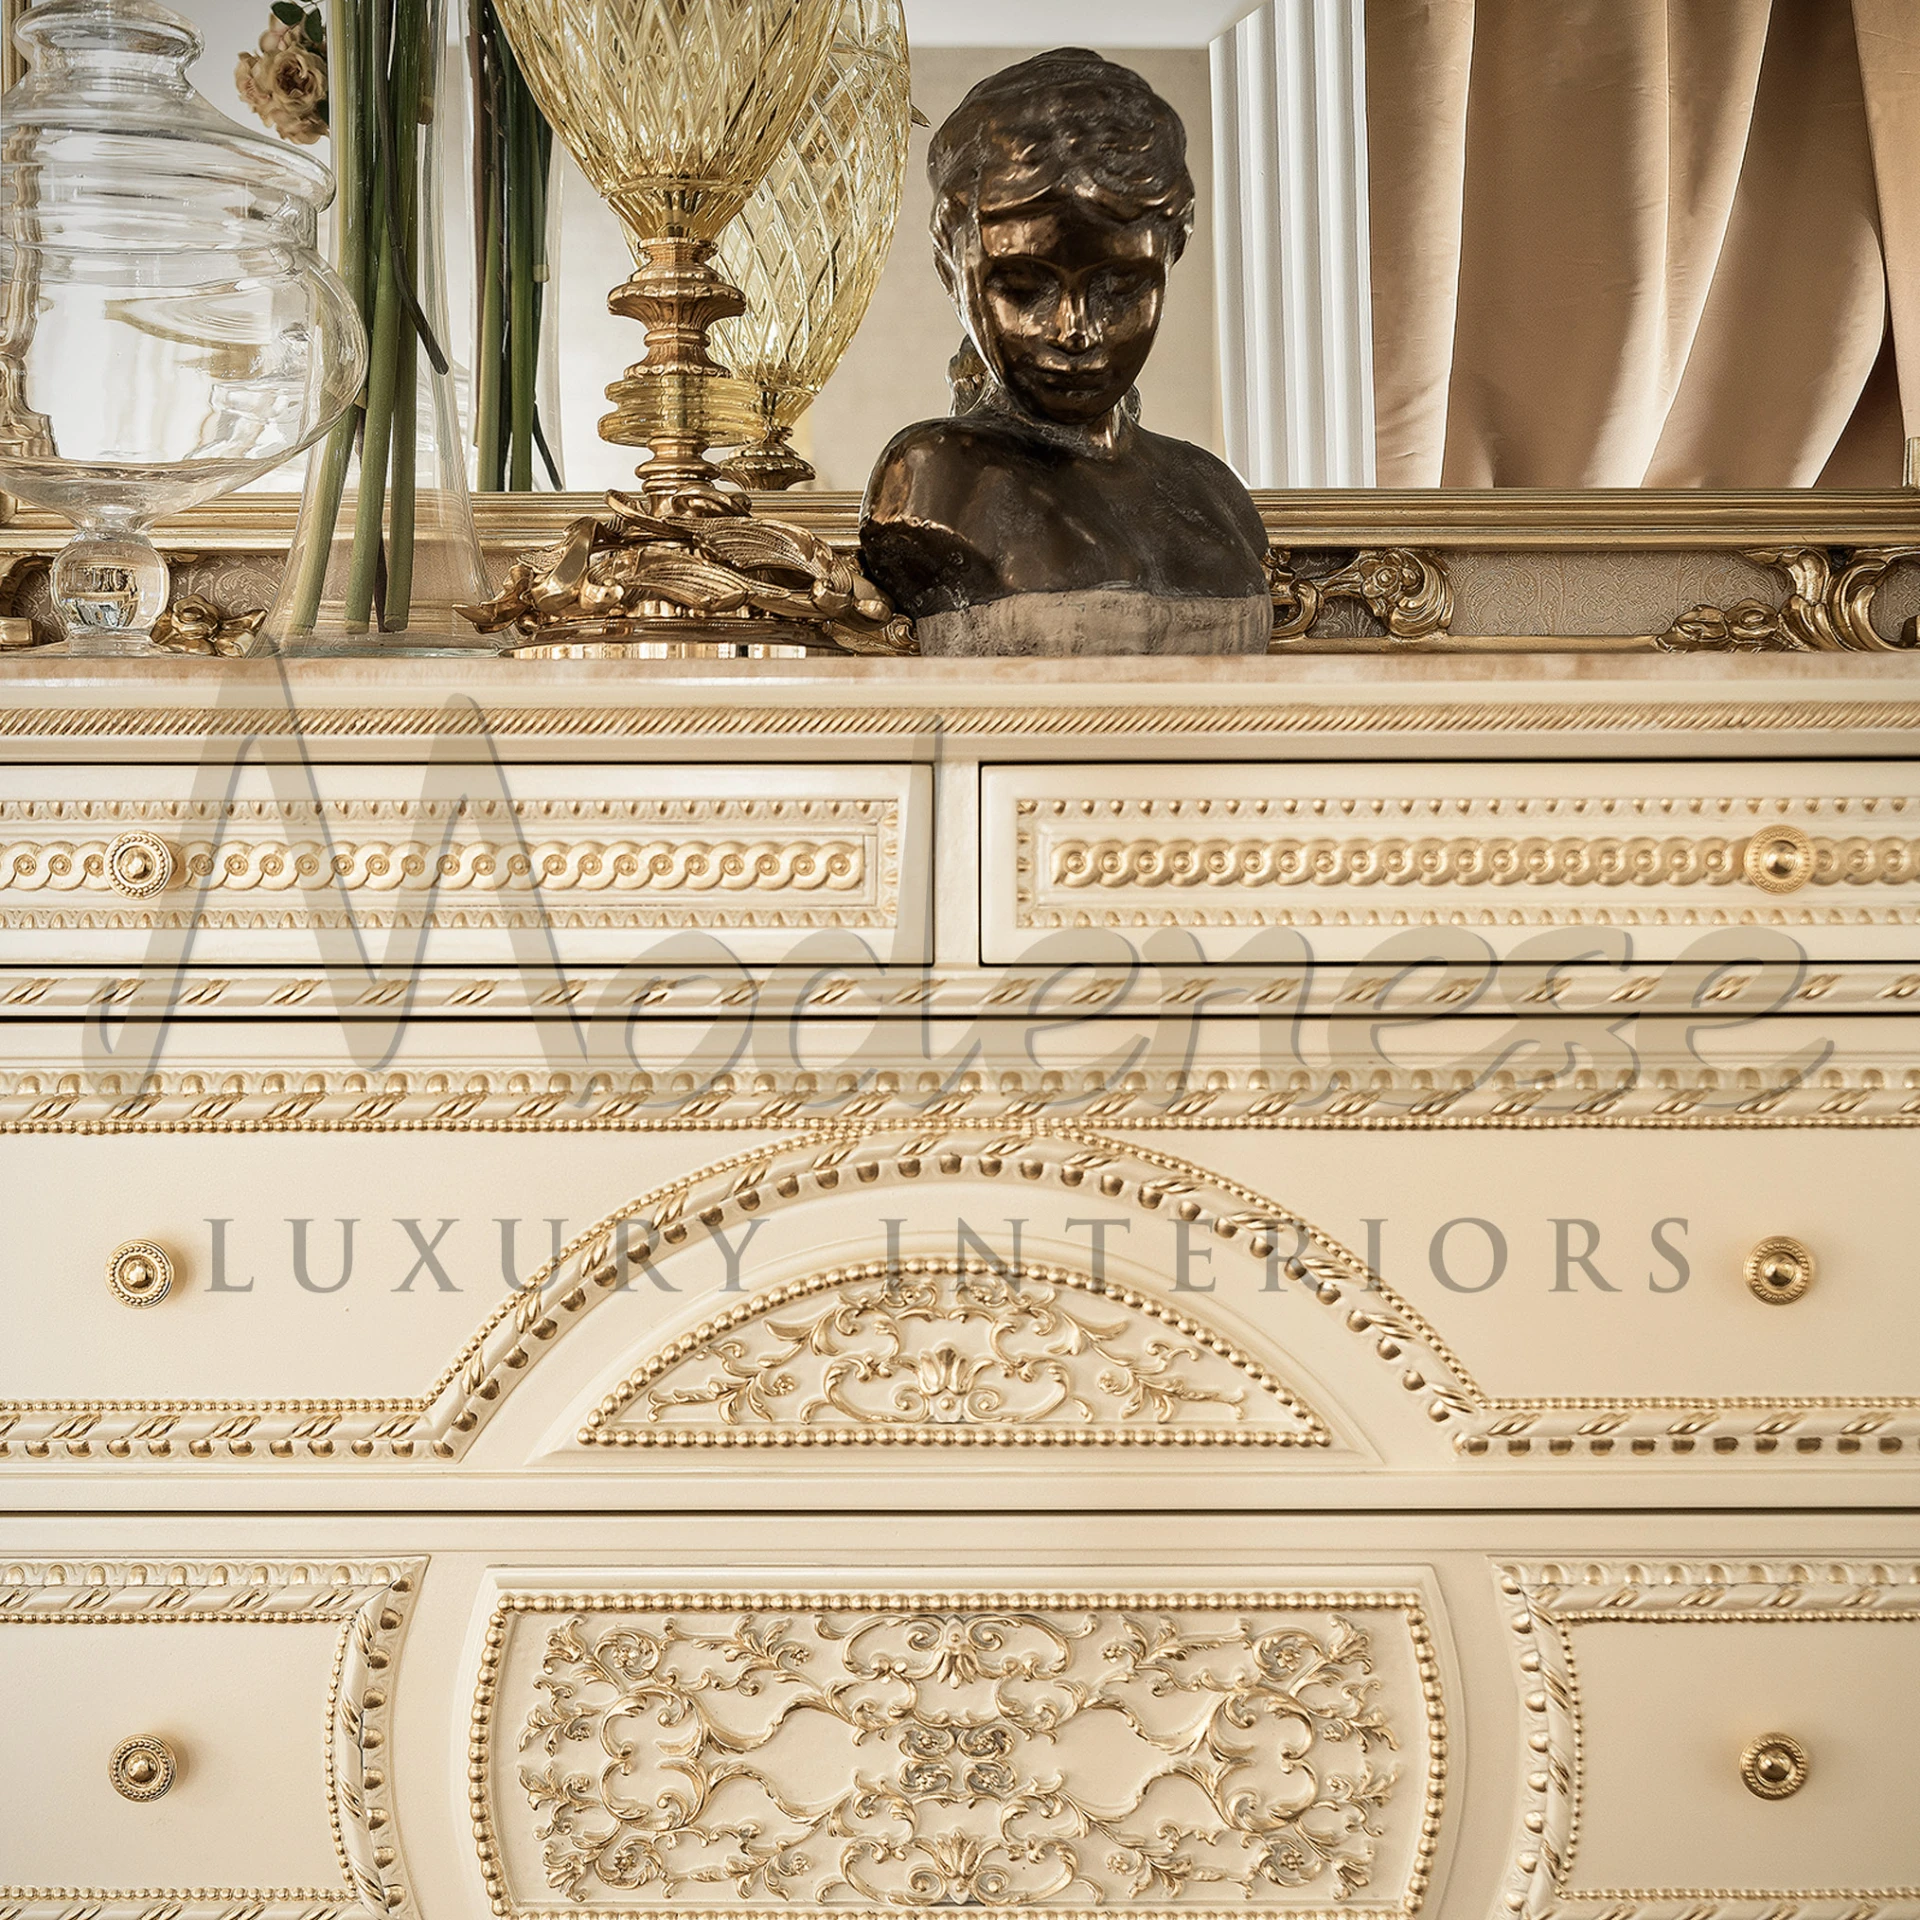 Vintage-style classical luxurious carved chest in ivory with a marble countertop and antique appeal made in Italy by Modenese Luxury Interiors Manufacturer